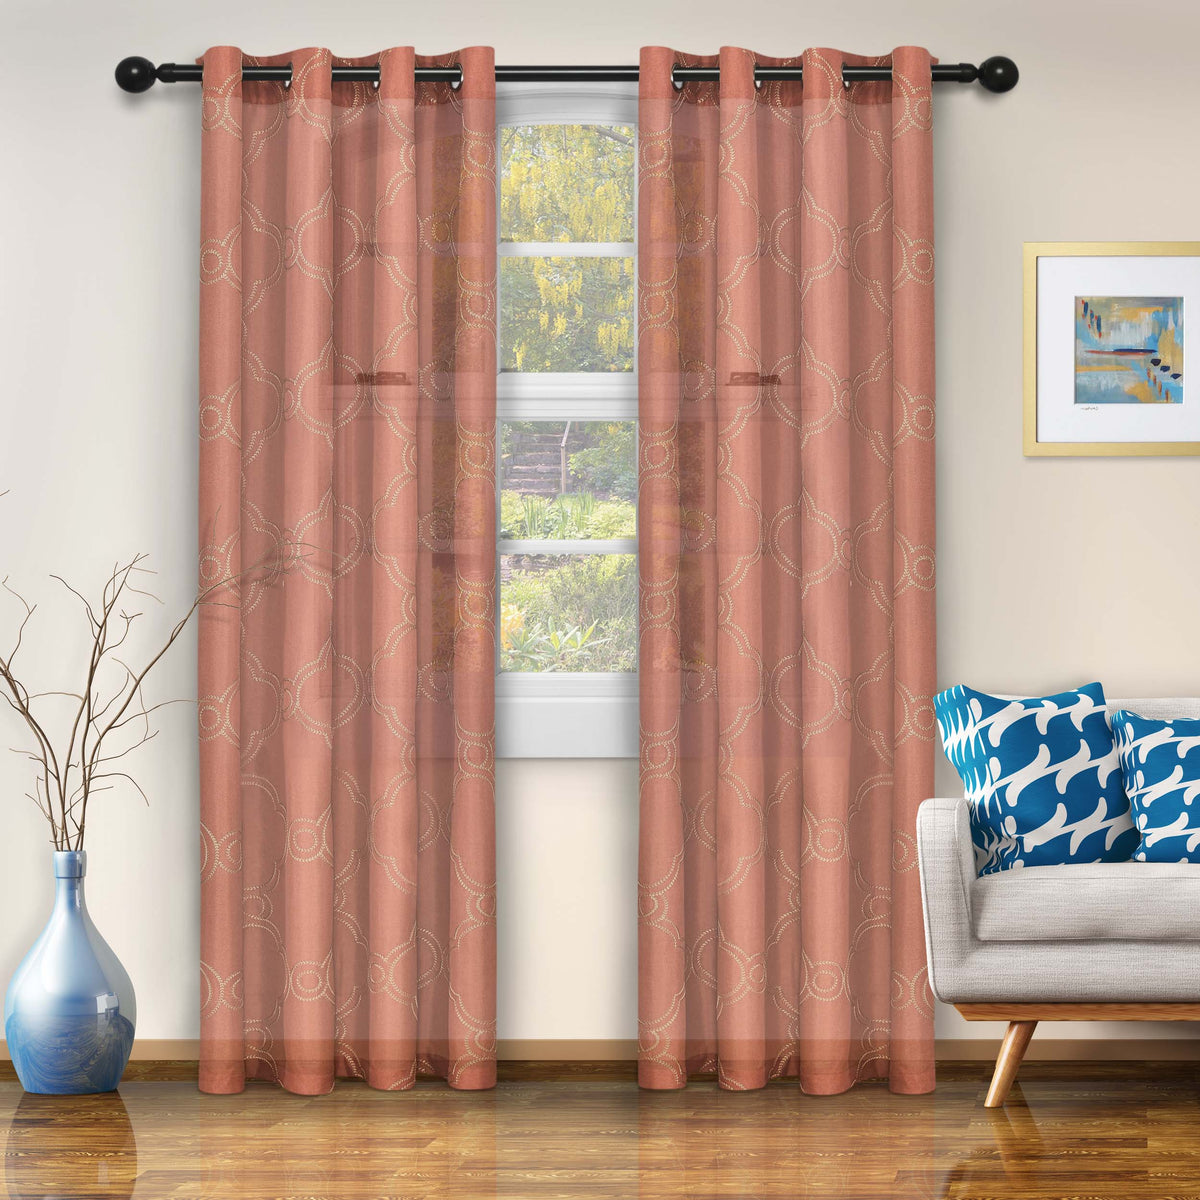 Embroidered Moroccan Sheer Grommet Curtain Panel Set